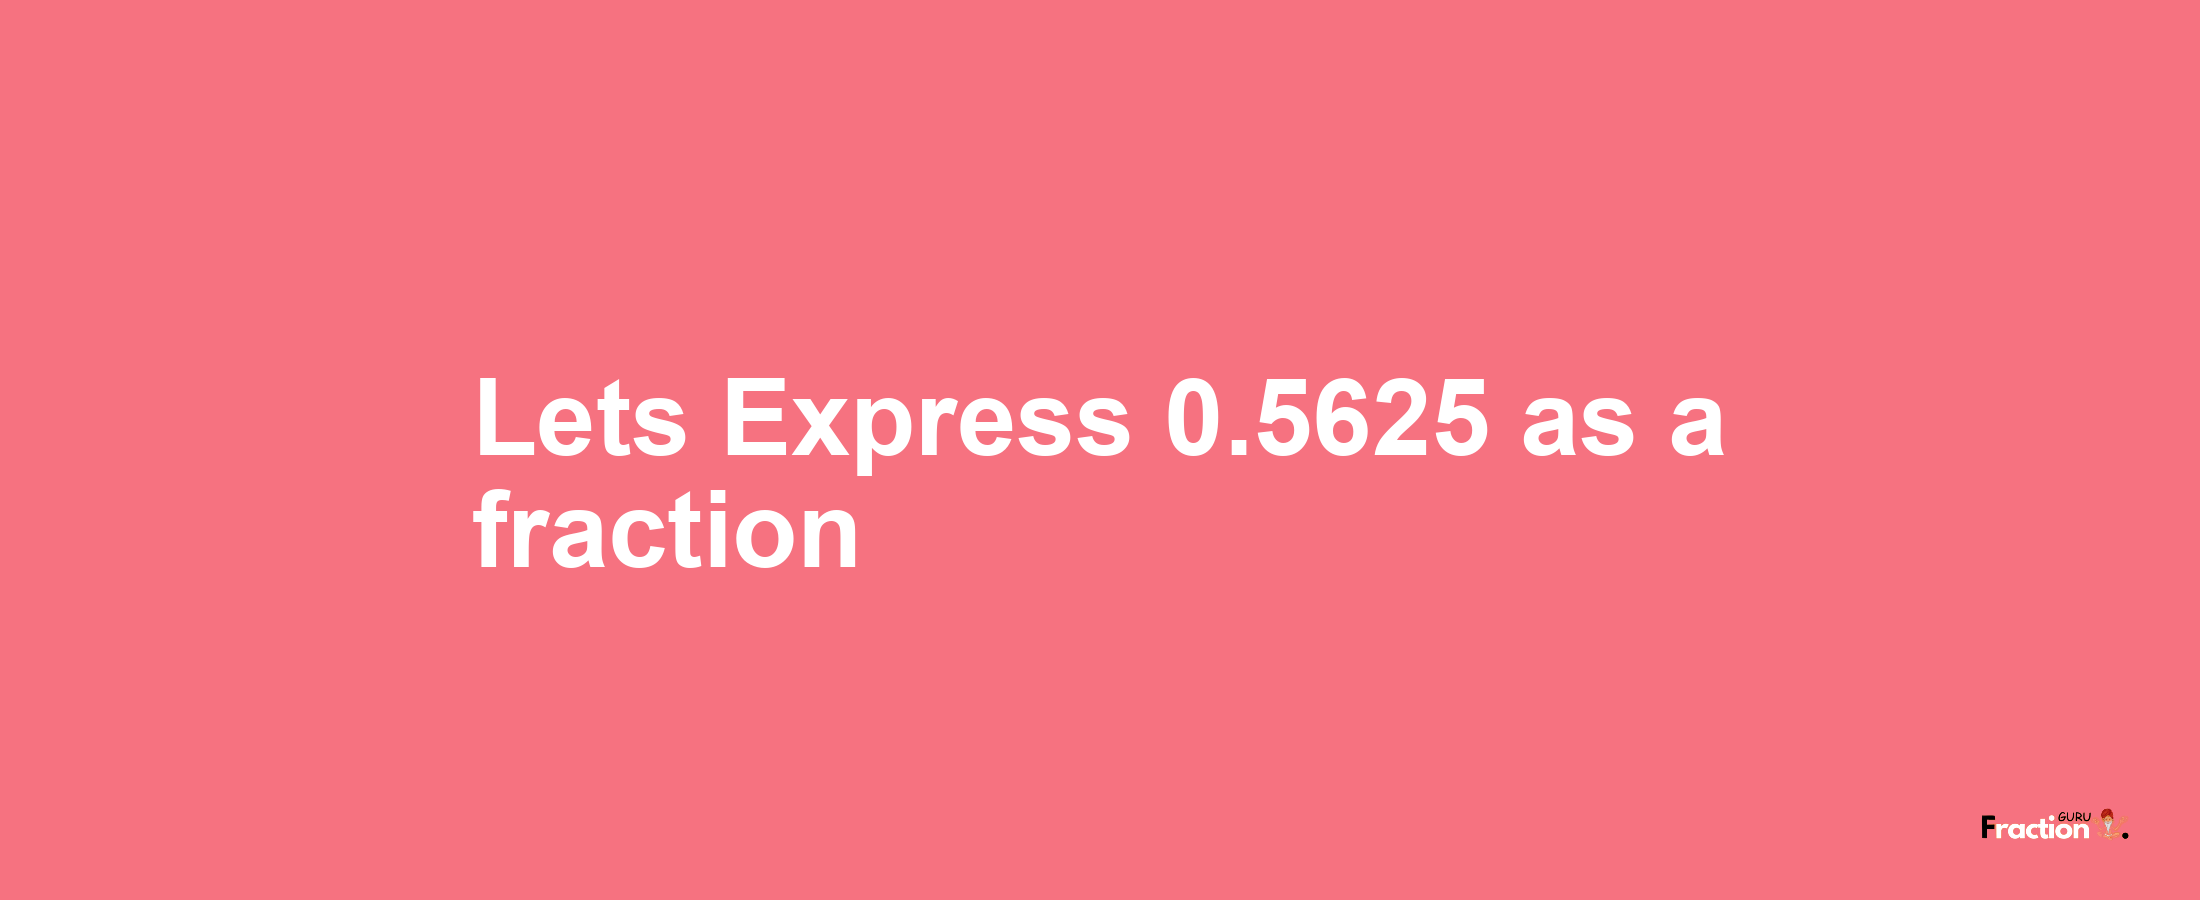 Lets Express 0.5625 as afraction